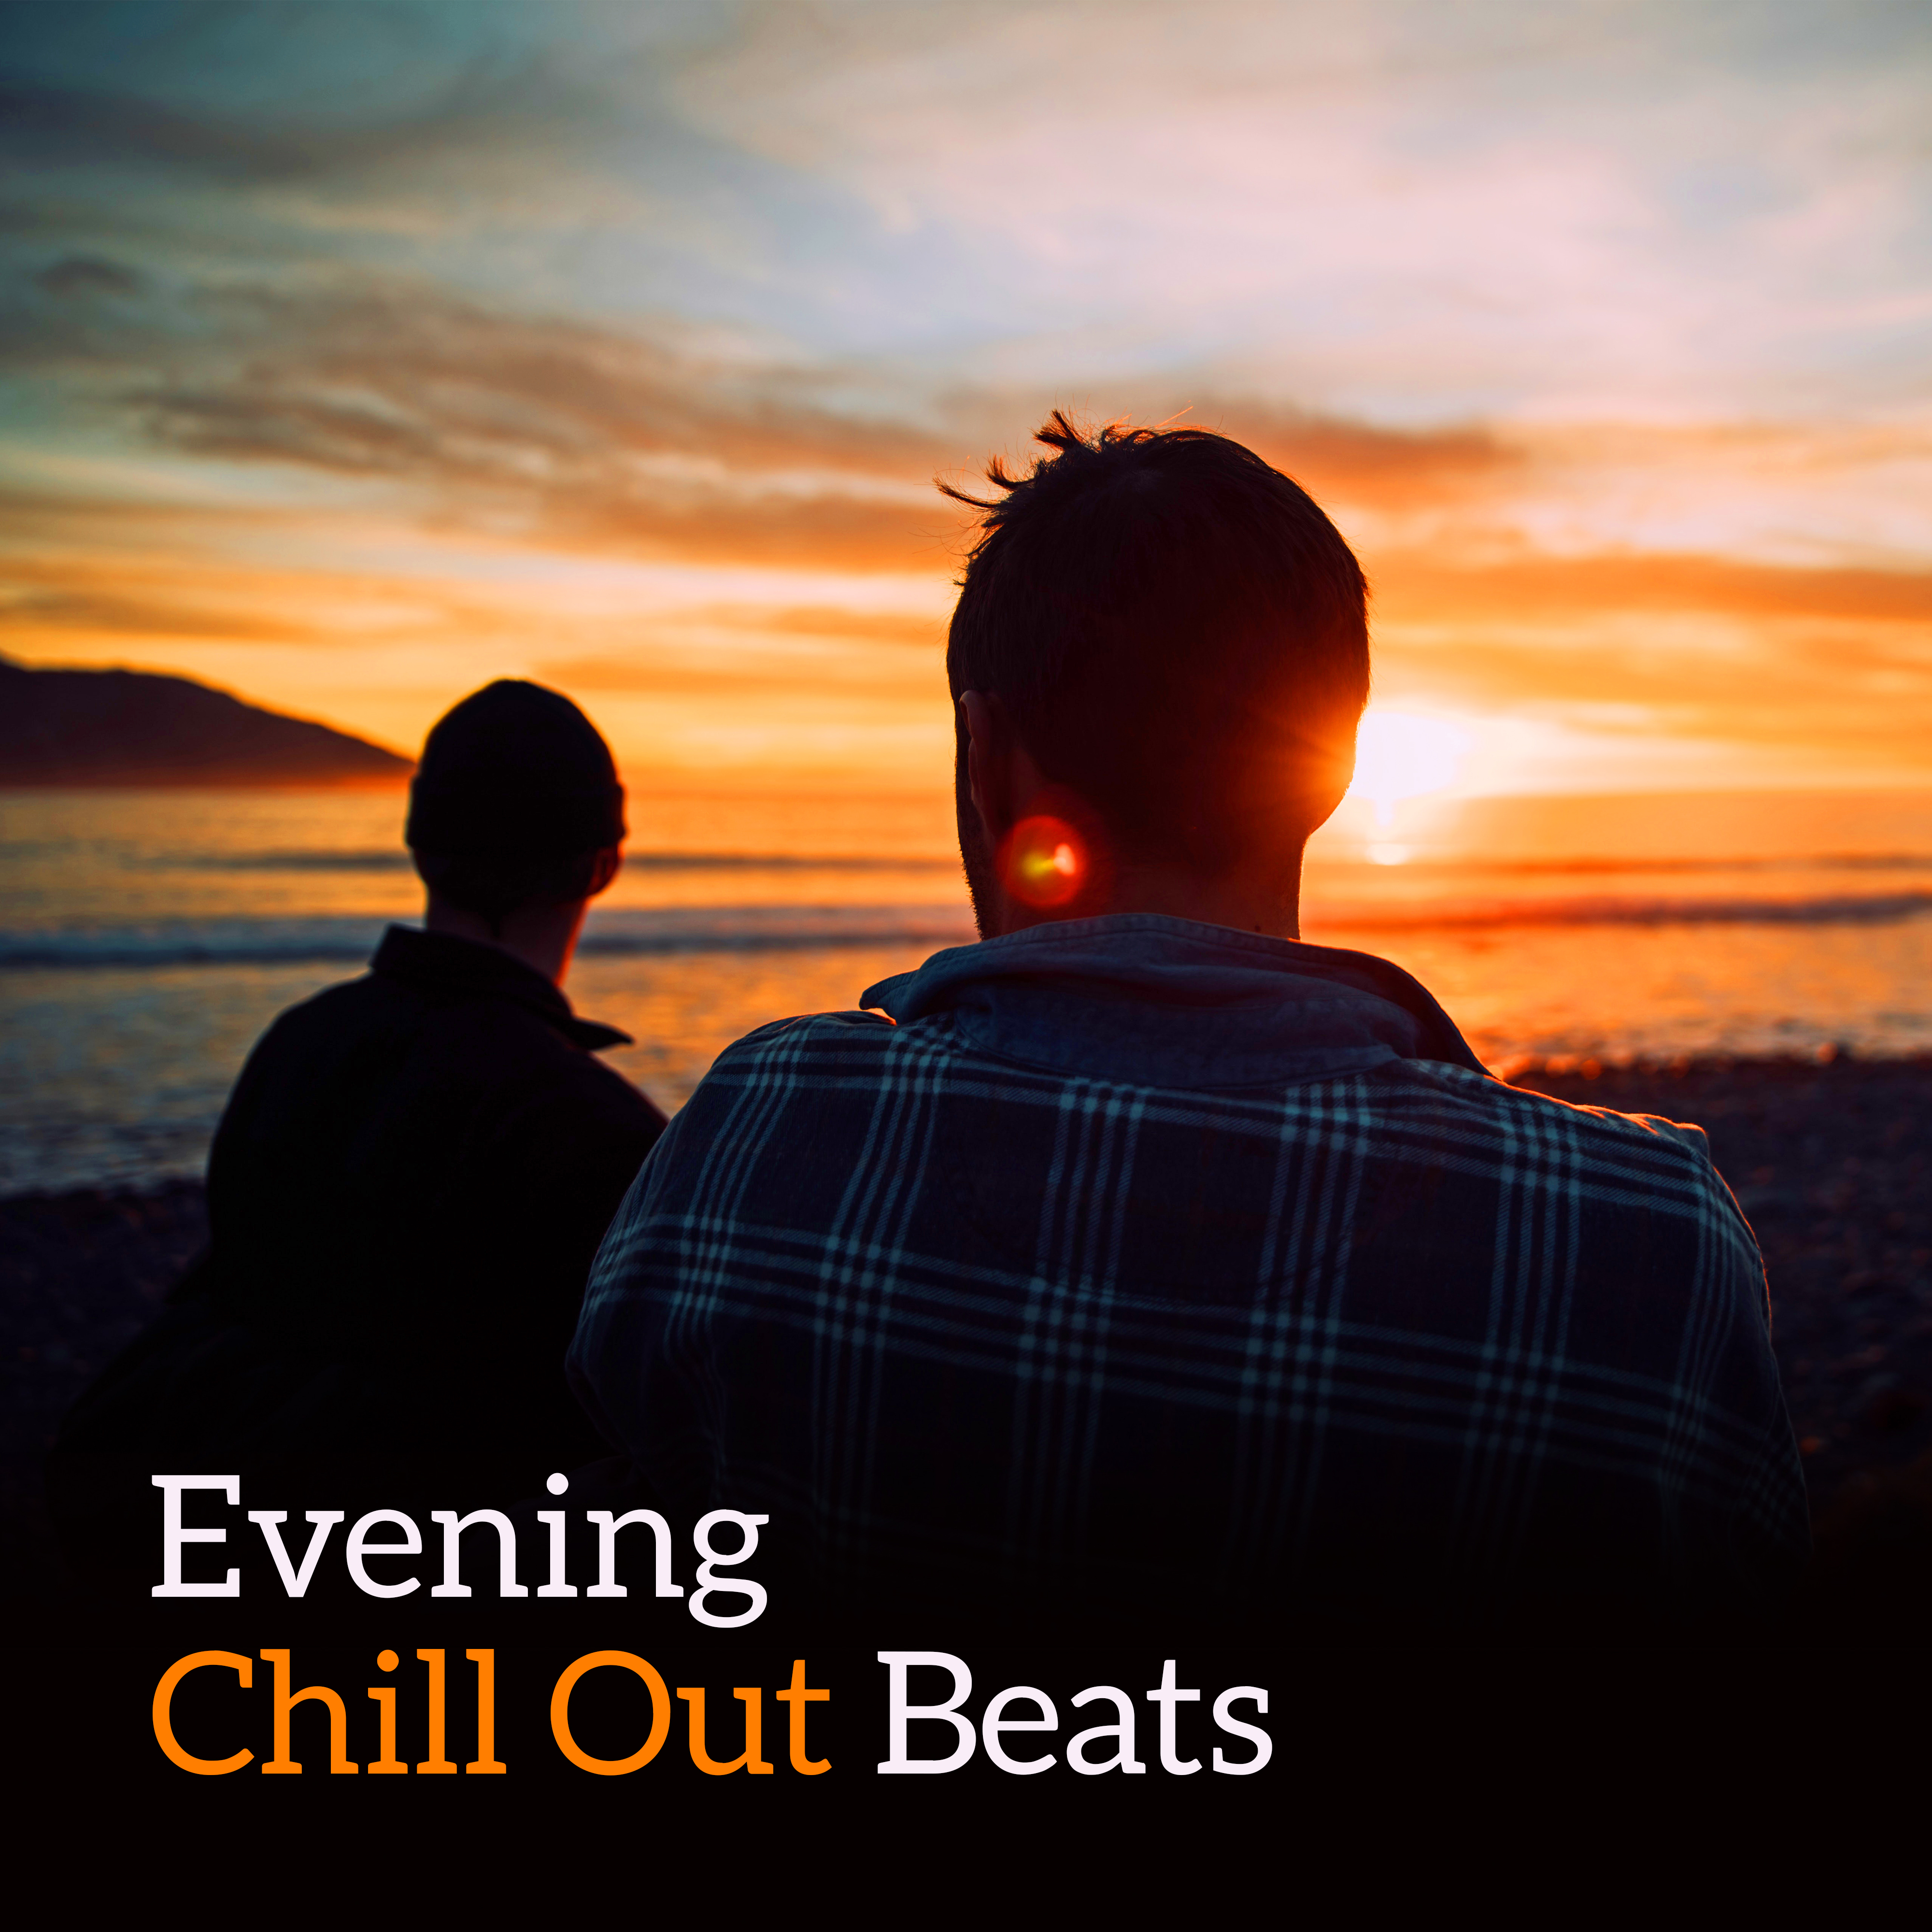 Evening Chill Out Beats – Summer Relaxation, Peaceful Waves, Calm Night, Chill Out Dreaming, Holiday 2017